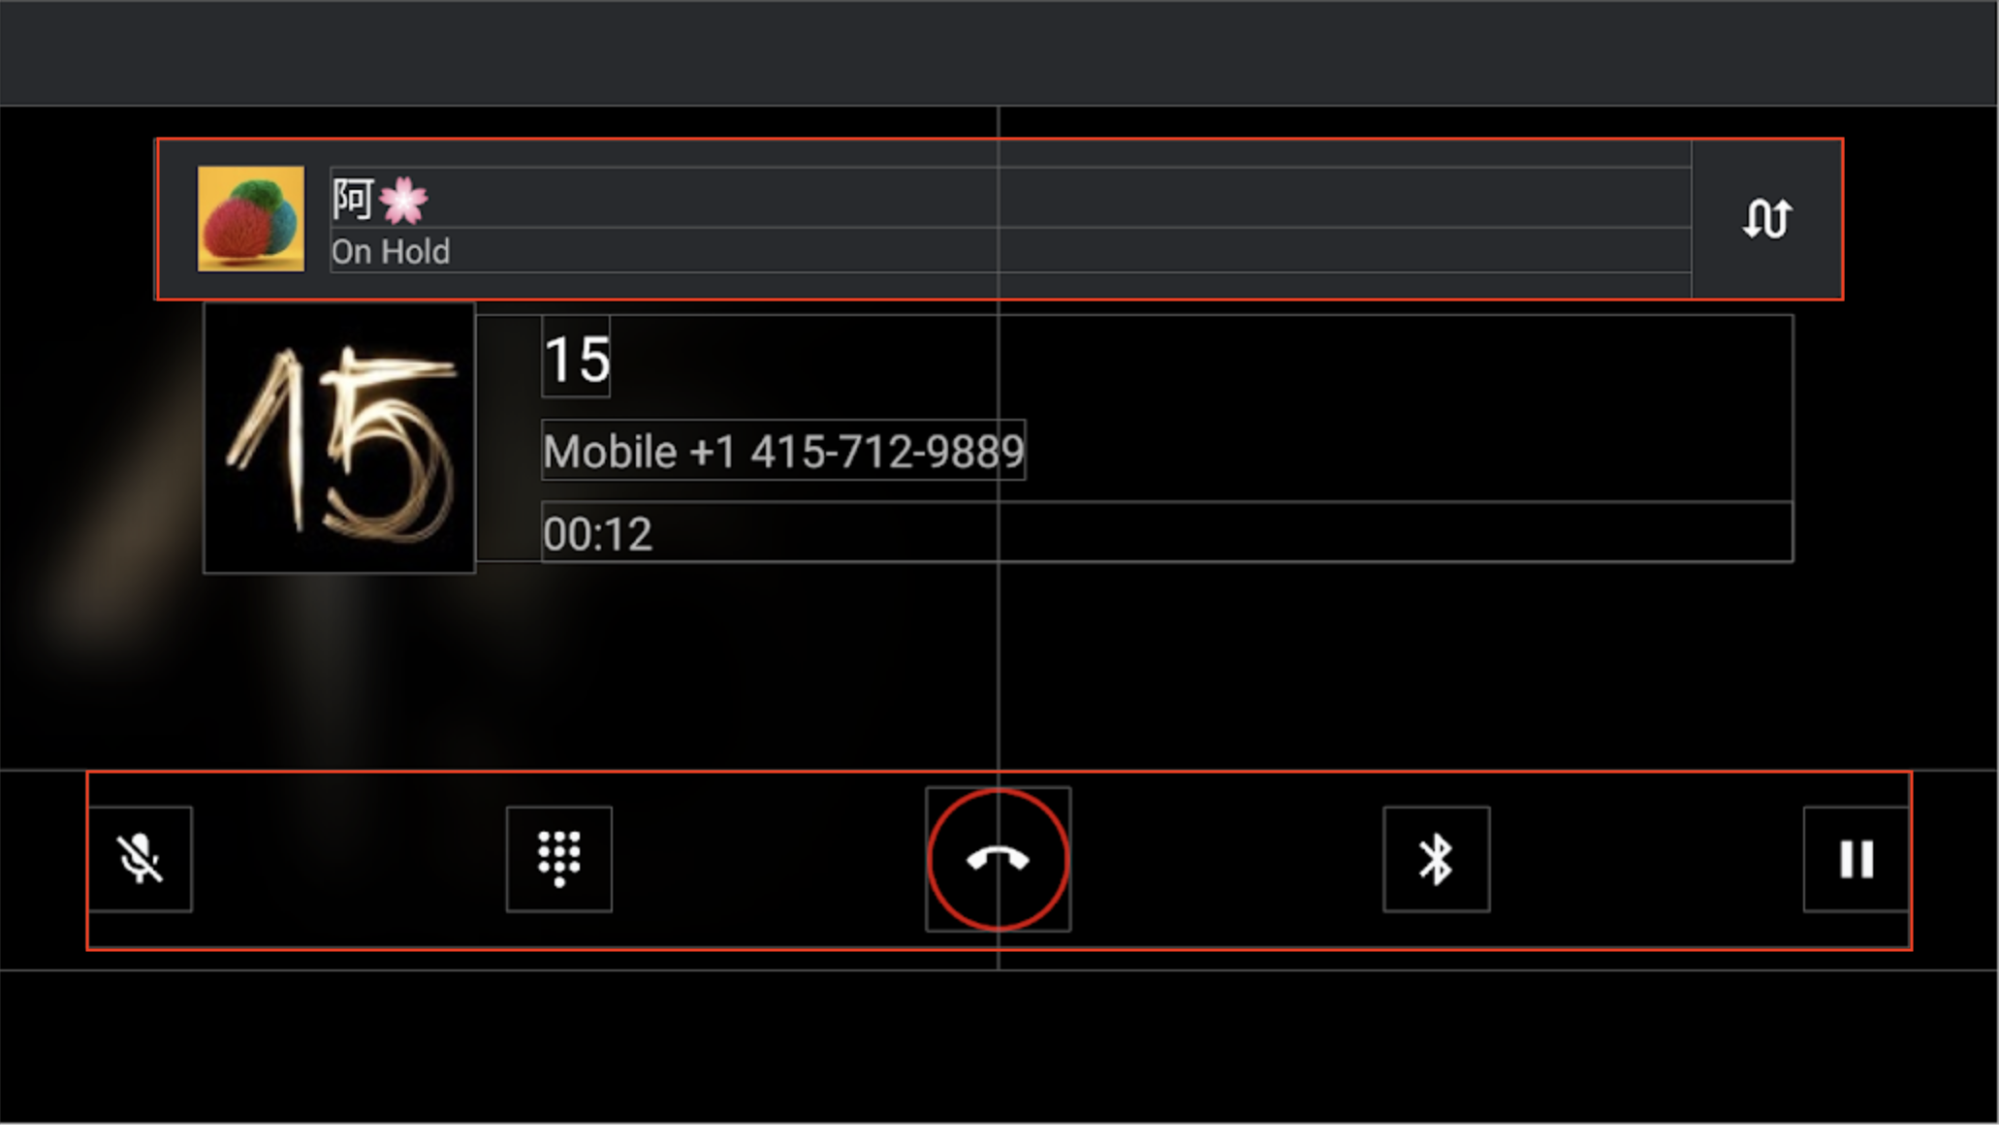 Ongoing Call screen in landscape mode